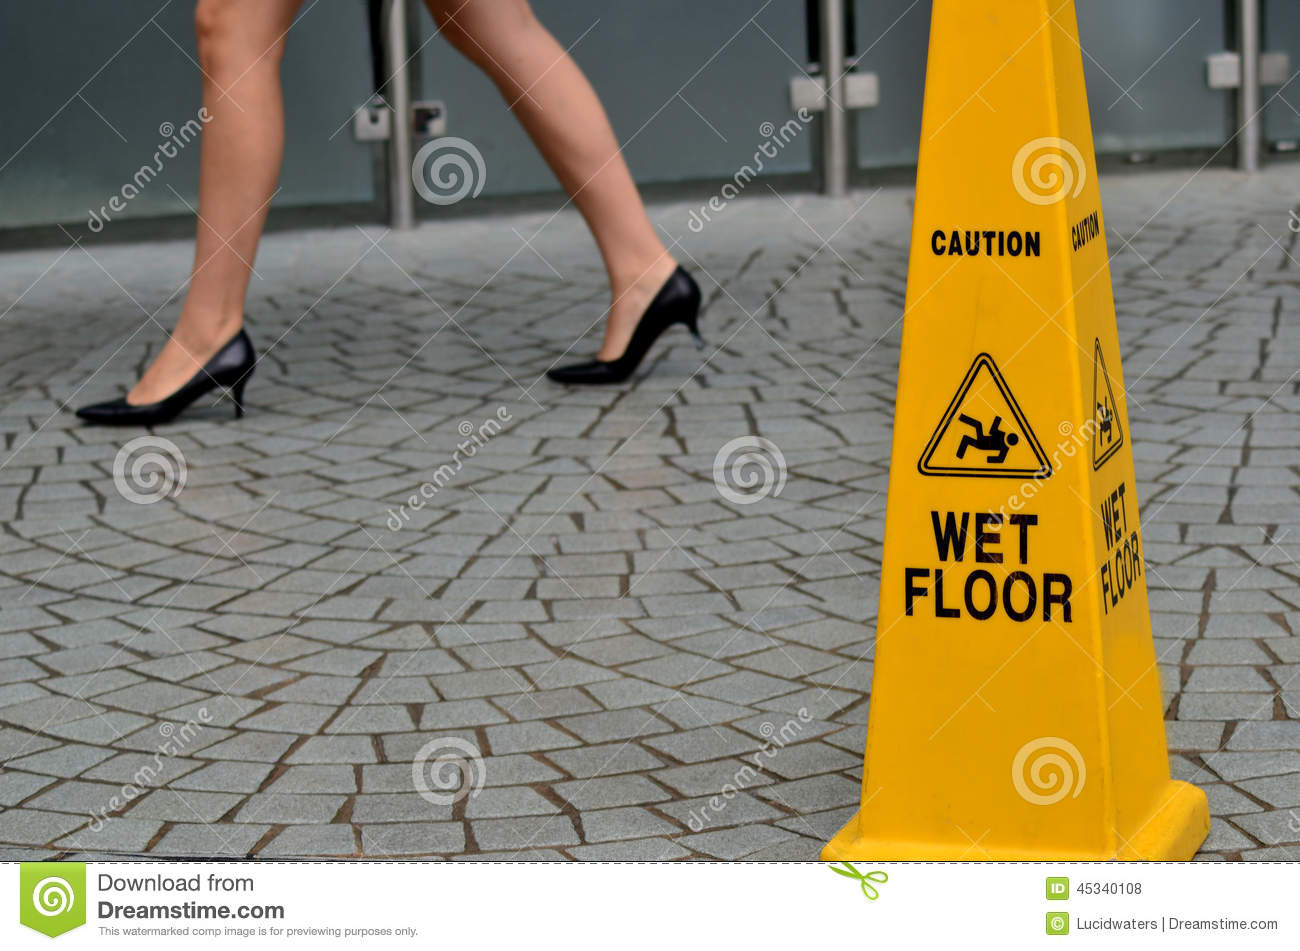 Slippery Floor Surface Warning Sign And Symbol In Building Hall